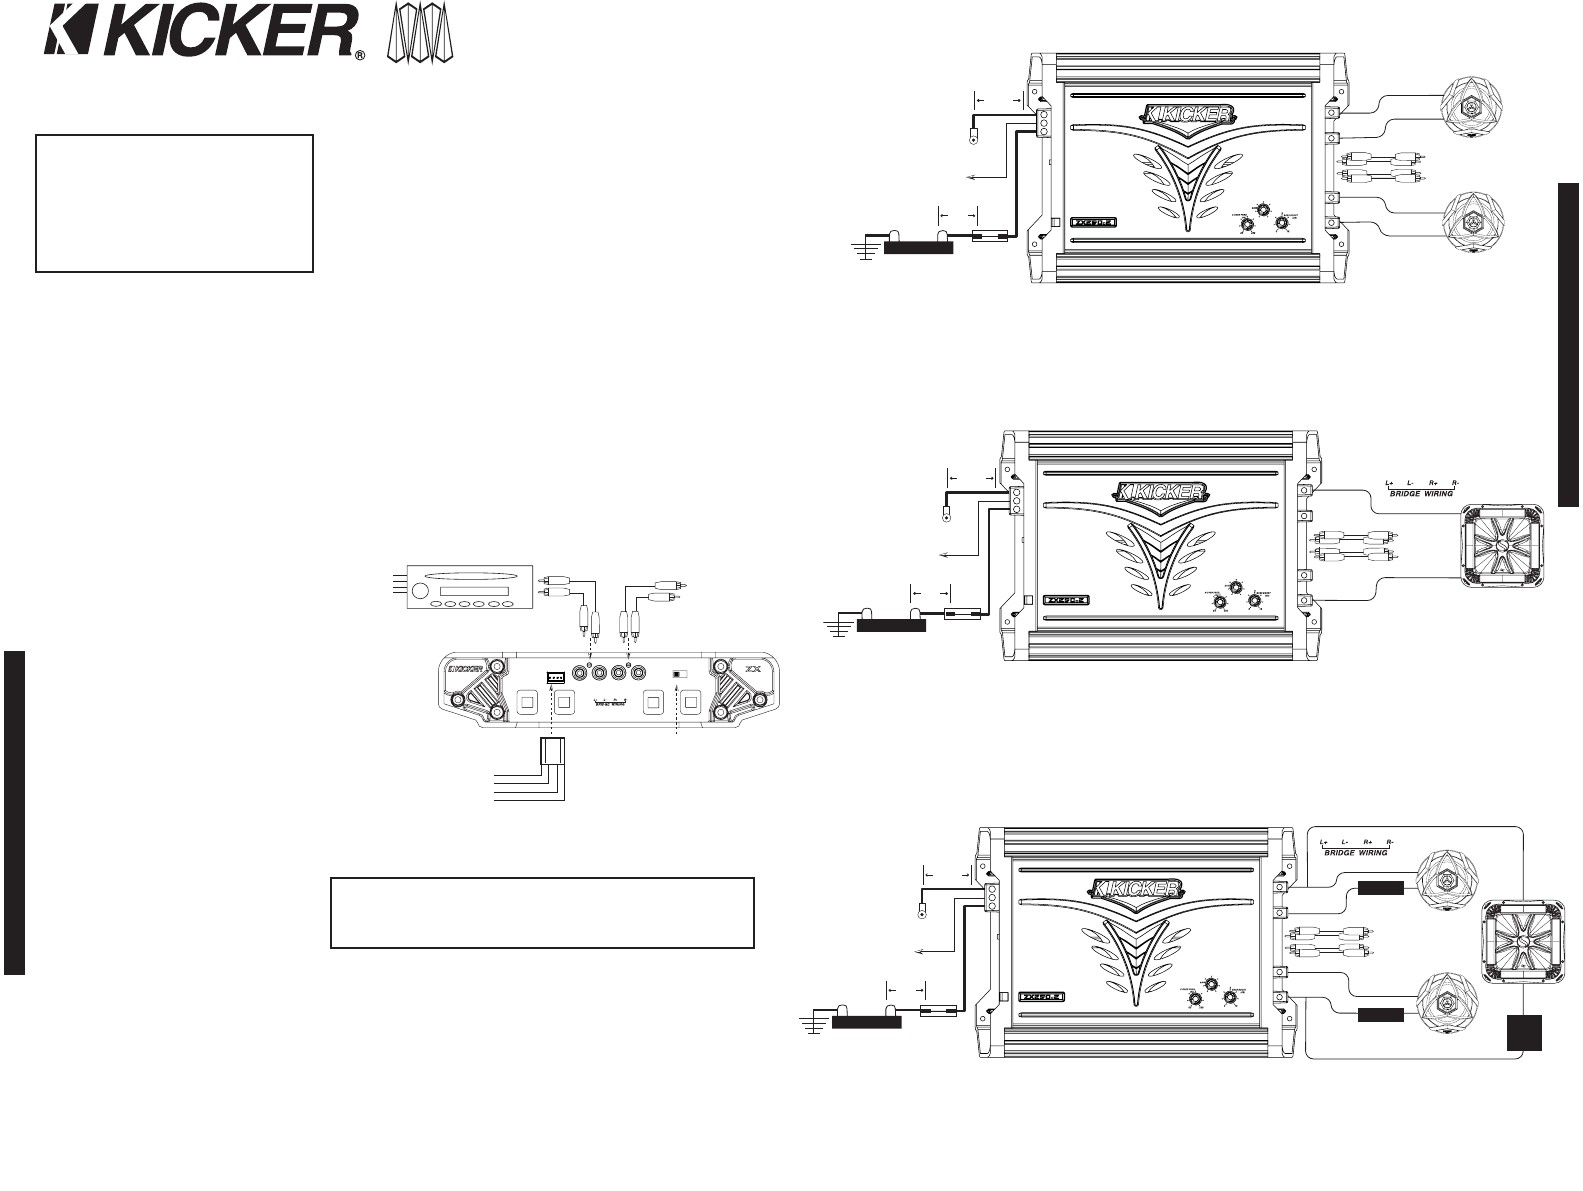 Subwoofer Wiring Diagrams Within Kicker Comp 12 Diagram In - Kicker Wiring Diagram